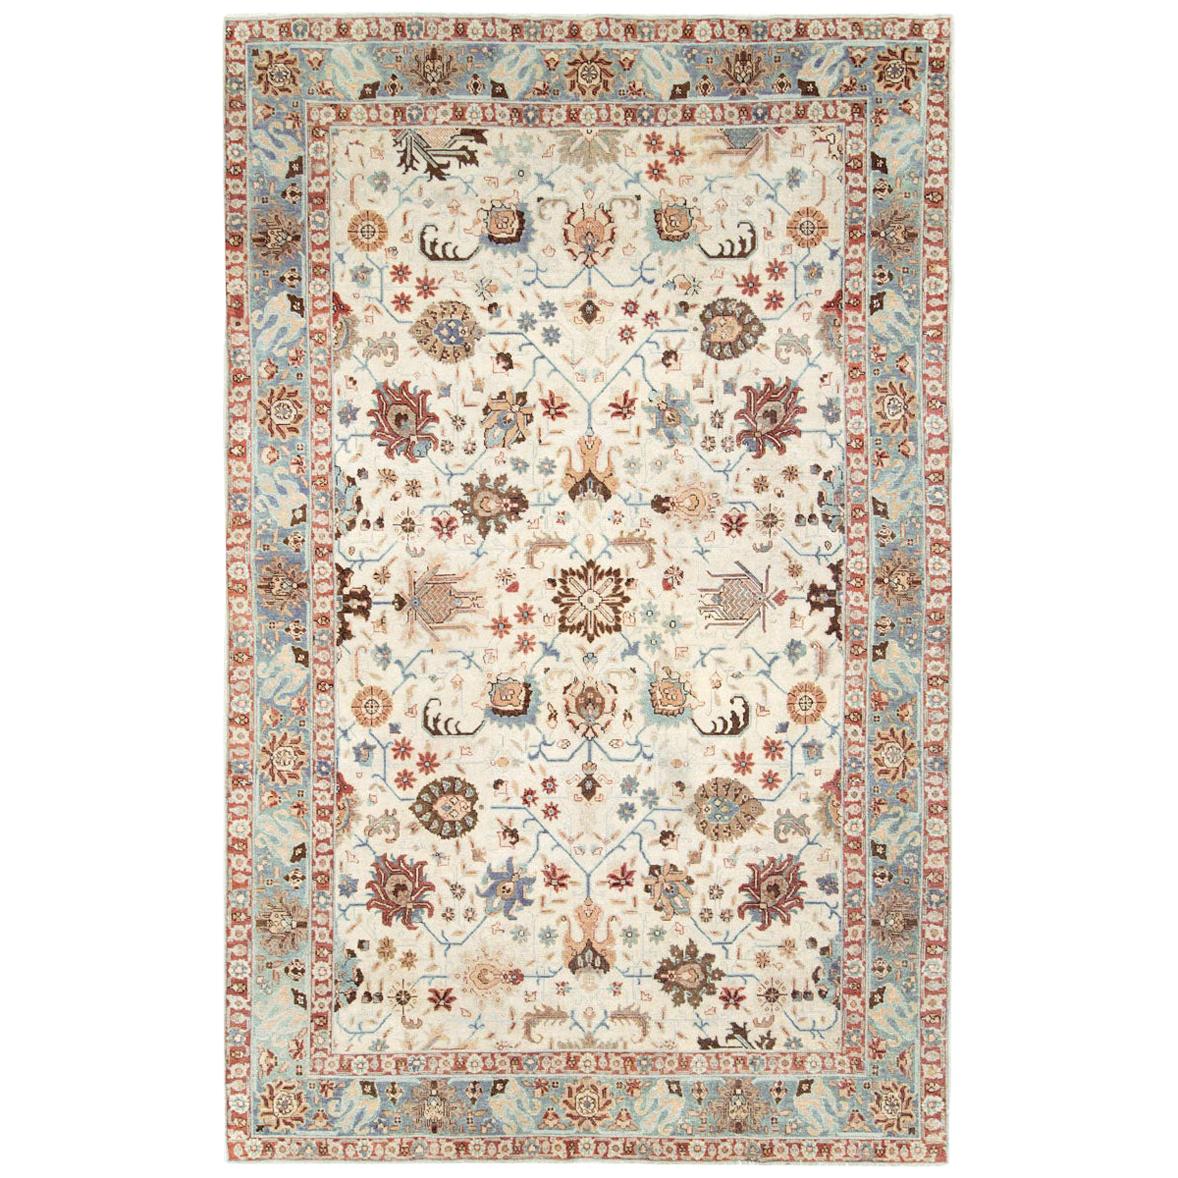 Midcentury Persian Handmade Accent Rug in Ivory, Blue Grey, and Crimson Red For Sale